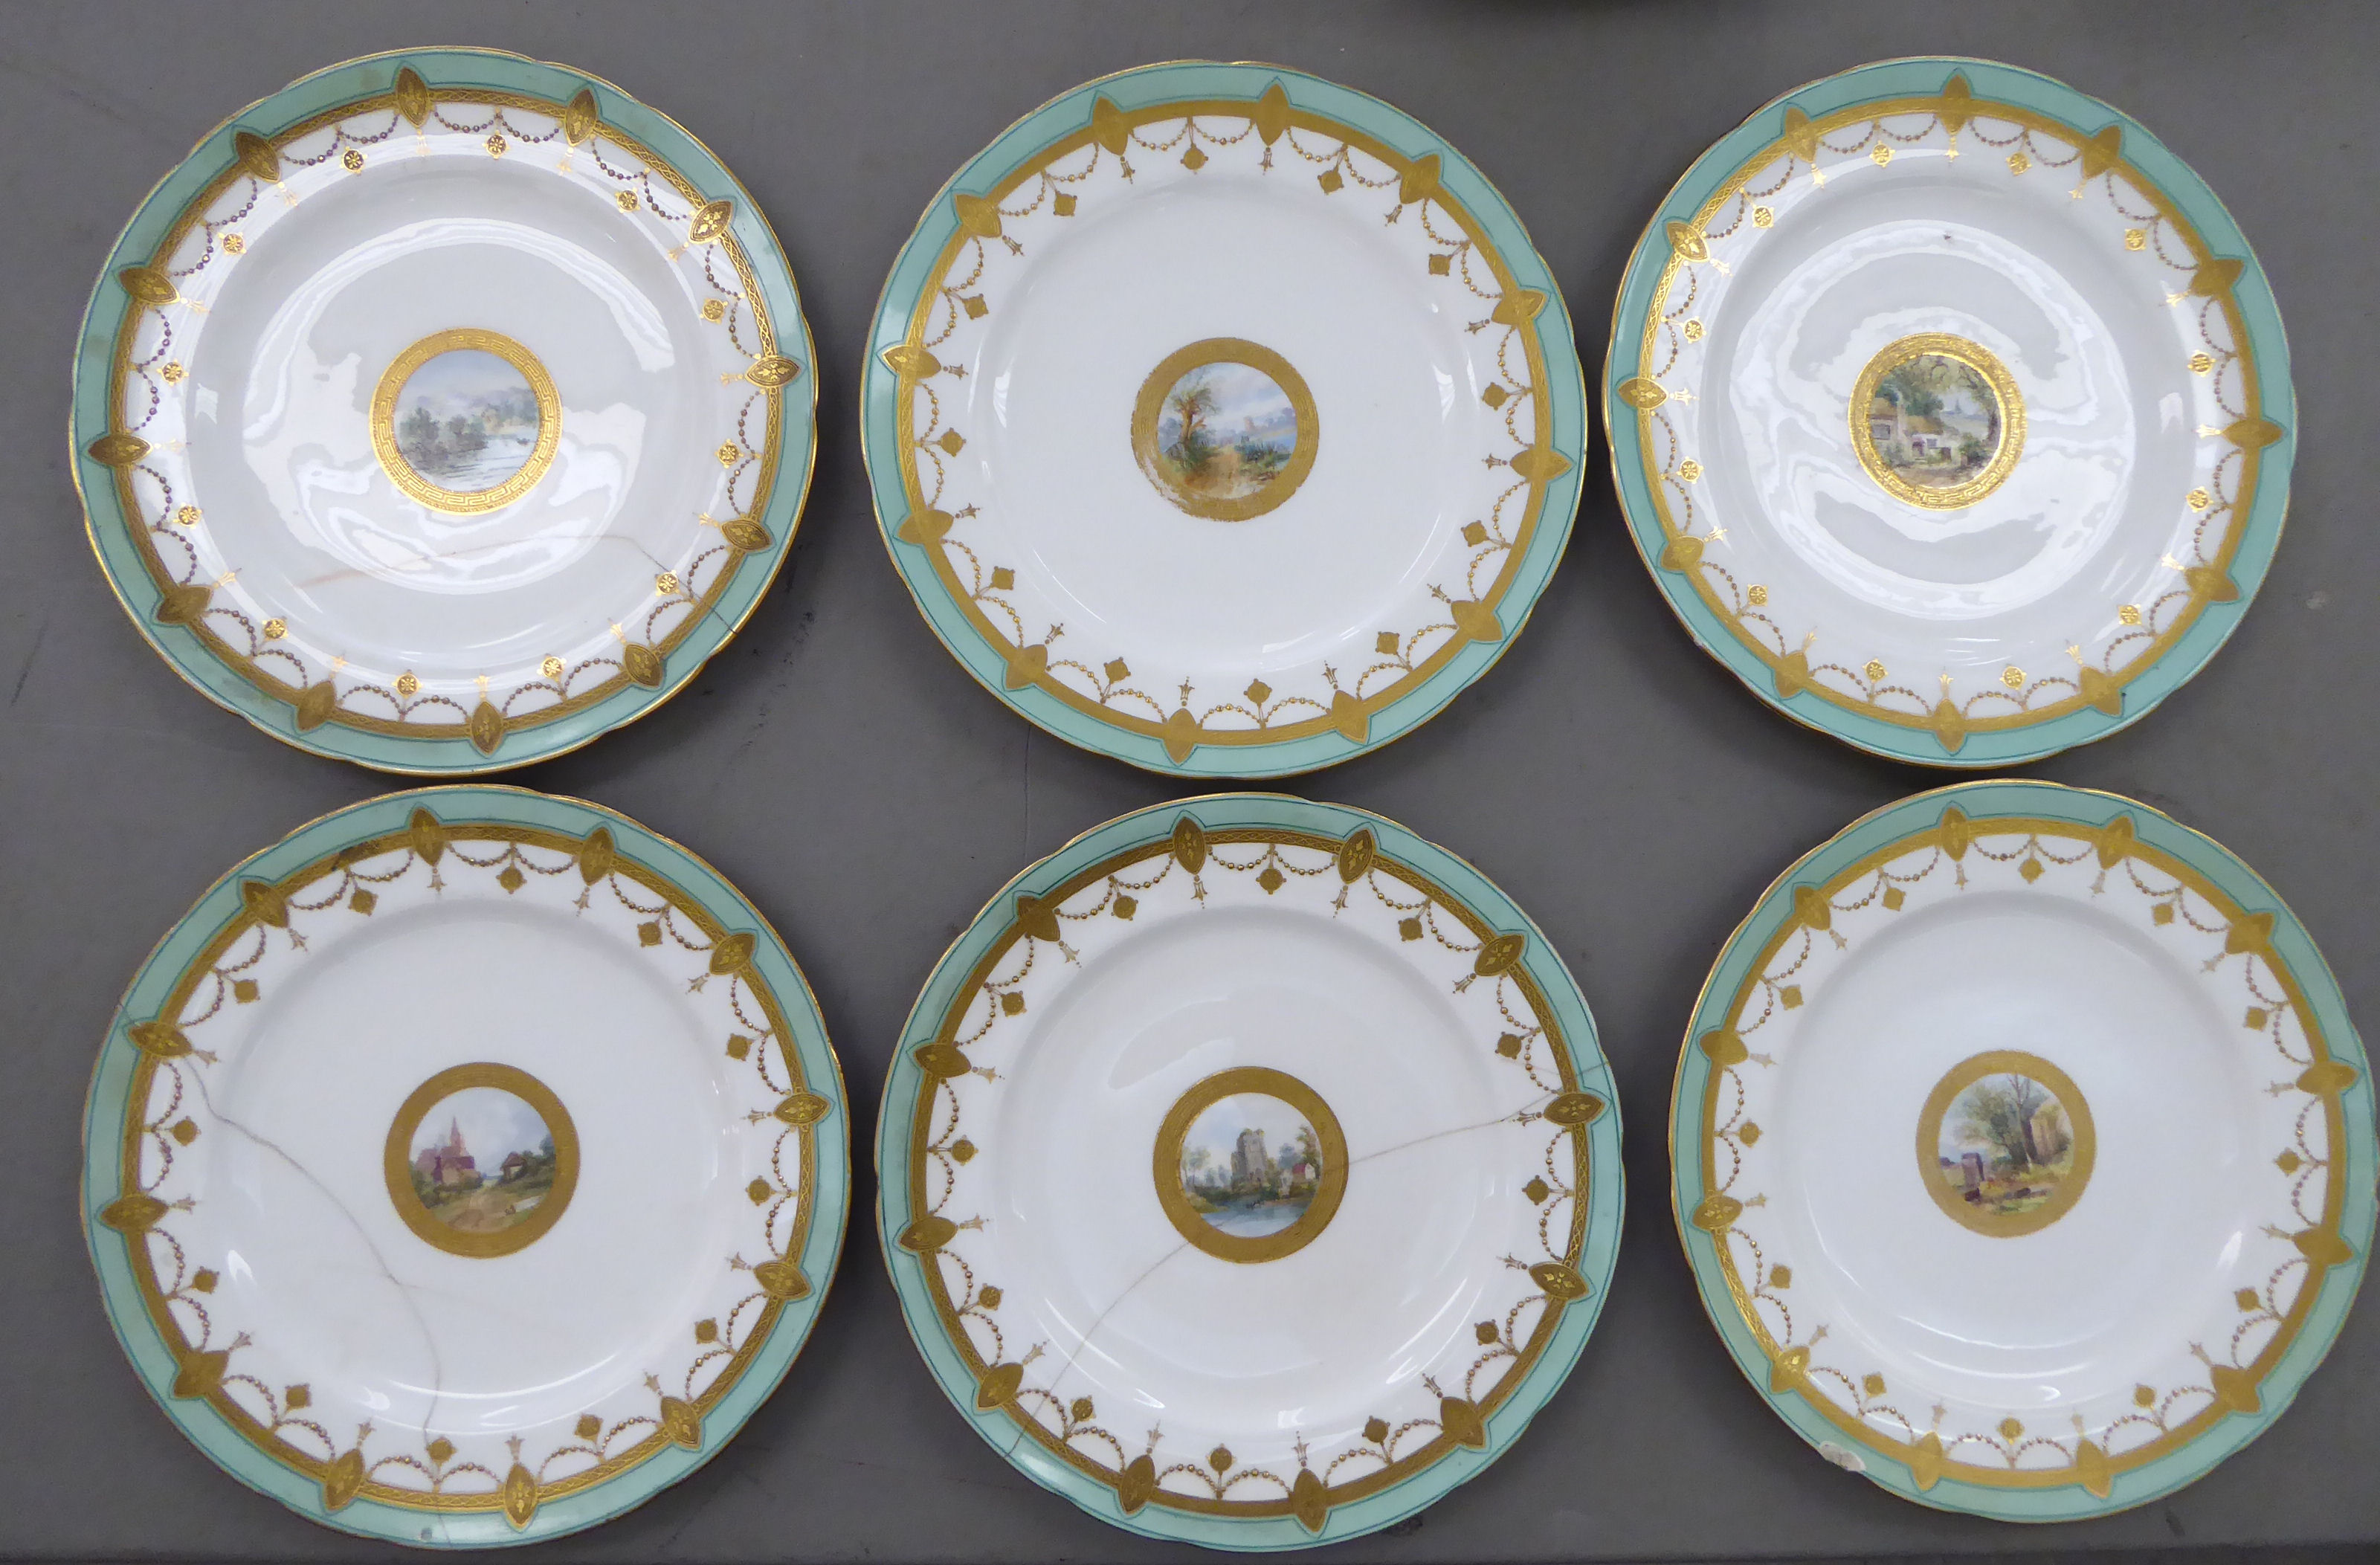 An early 20thC Minton porcelain dessert service, decorated with landscapes, cartouches, - Image 4 of 7